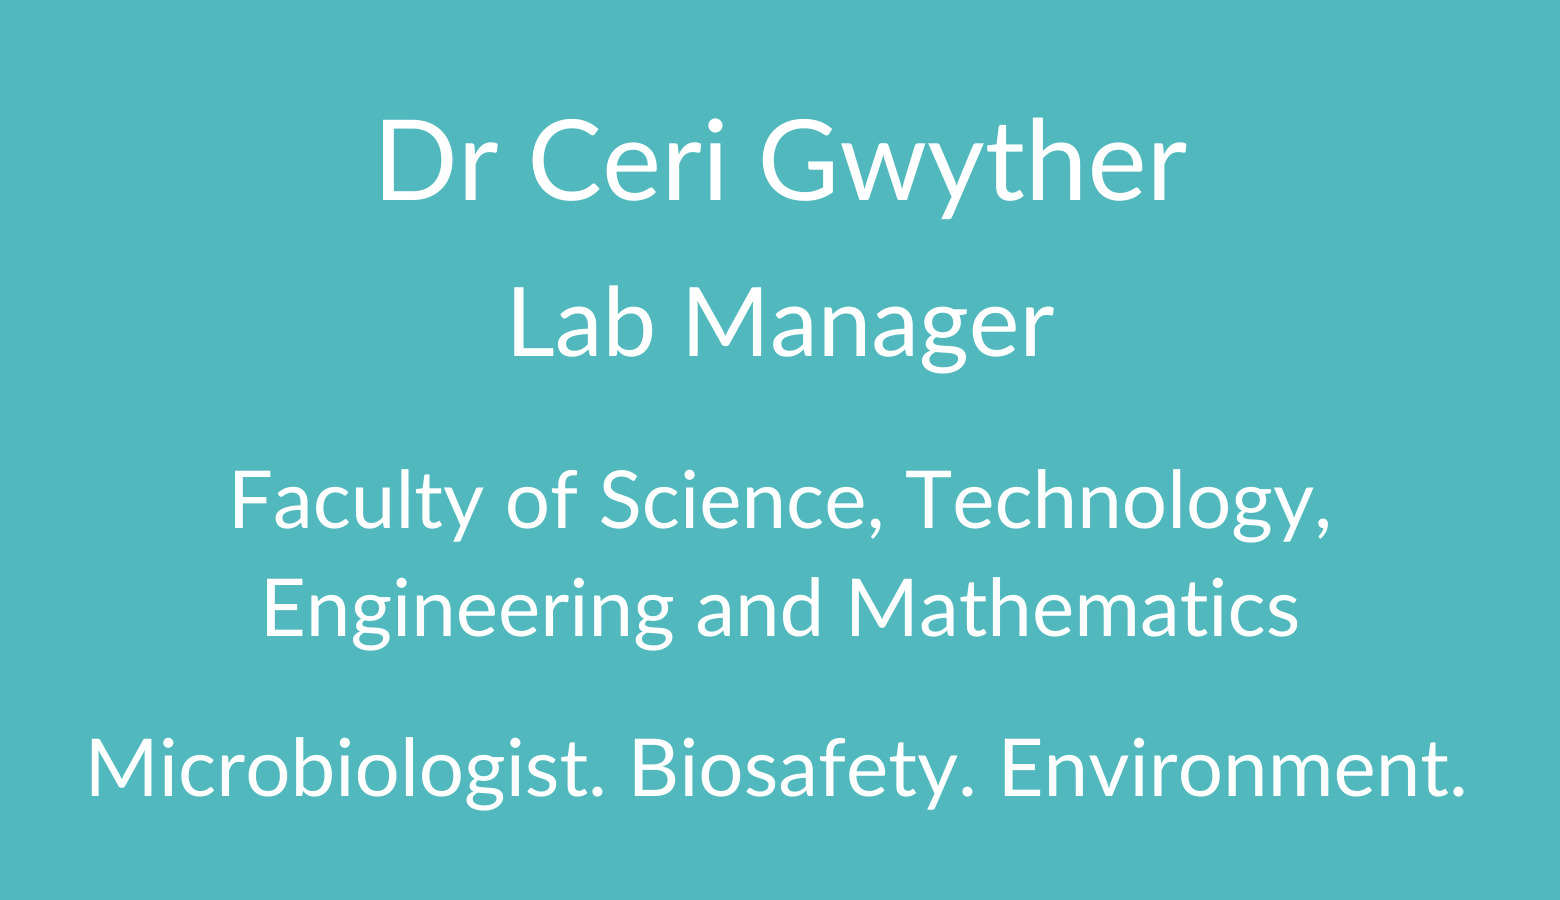 Dr Ceri Gwyther. Lab Manager. Faculty of Science. Technology, Engineering and Mathematics. Microbiologist. Biosafety. Environment.